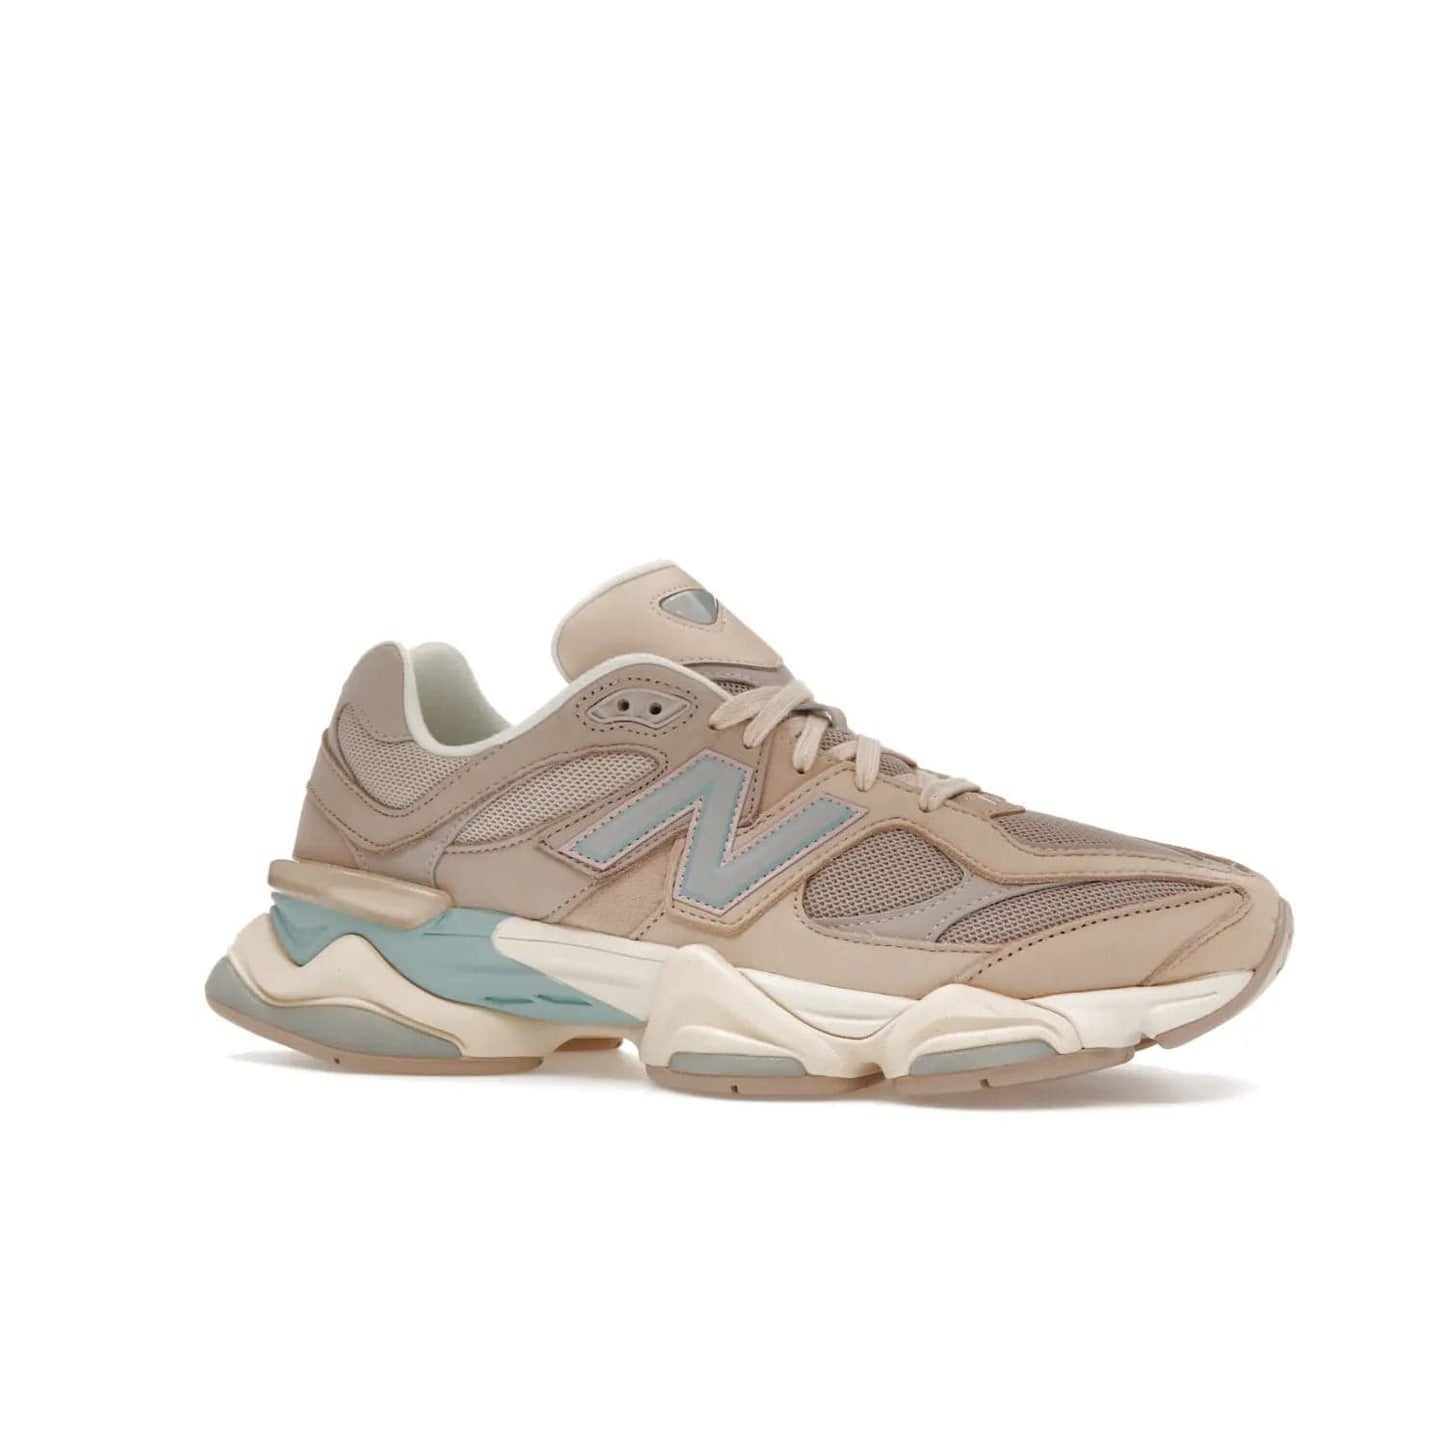 New Balance 9060 Ivory Cream Pink Sand - Image 3 - Only at www.BallersClubKickz.com - New Balance 9060 Ivory Cream Pink Sand - Sleek meshed upper, premium suede overlays, ABZORB cushioning. Get this unique sneaker ahead of the trend, launching December 6th, 2022!